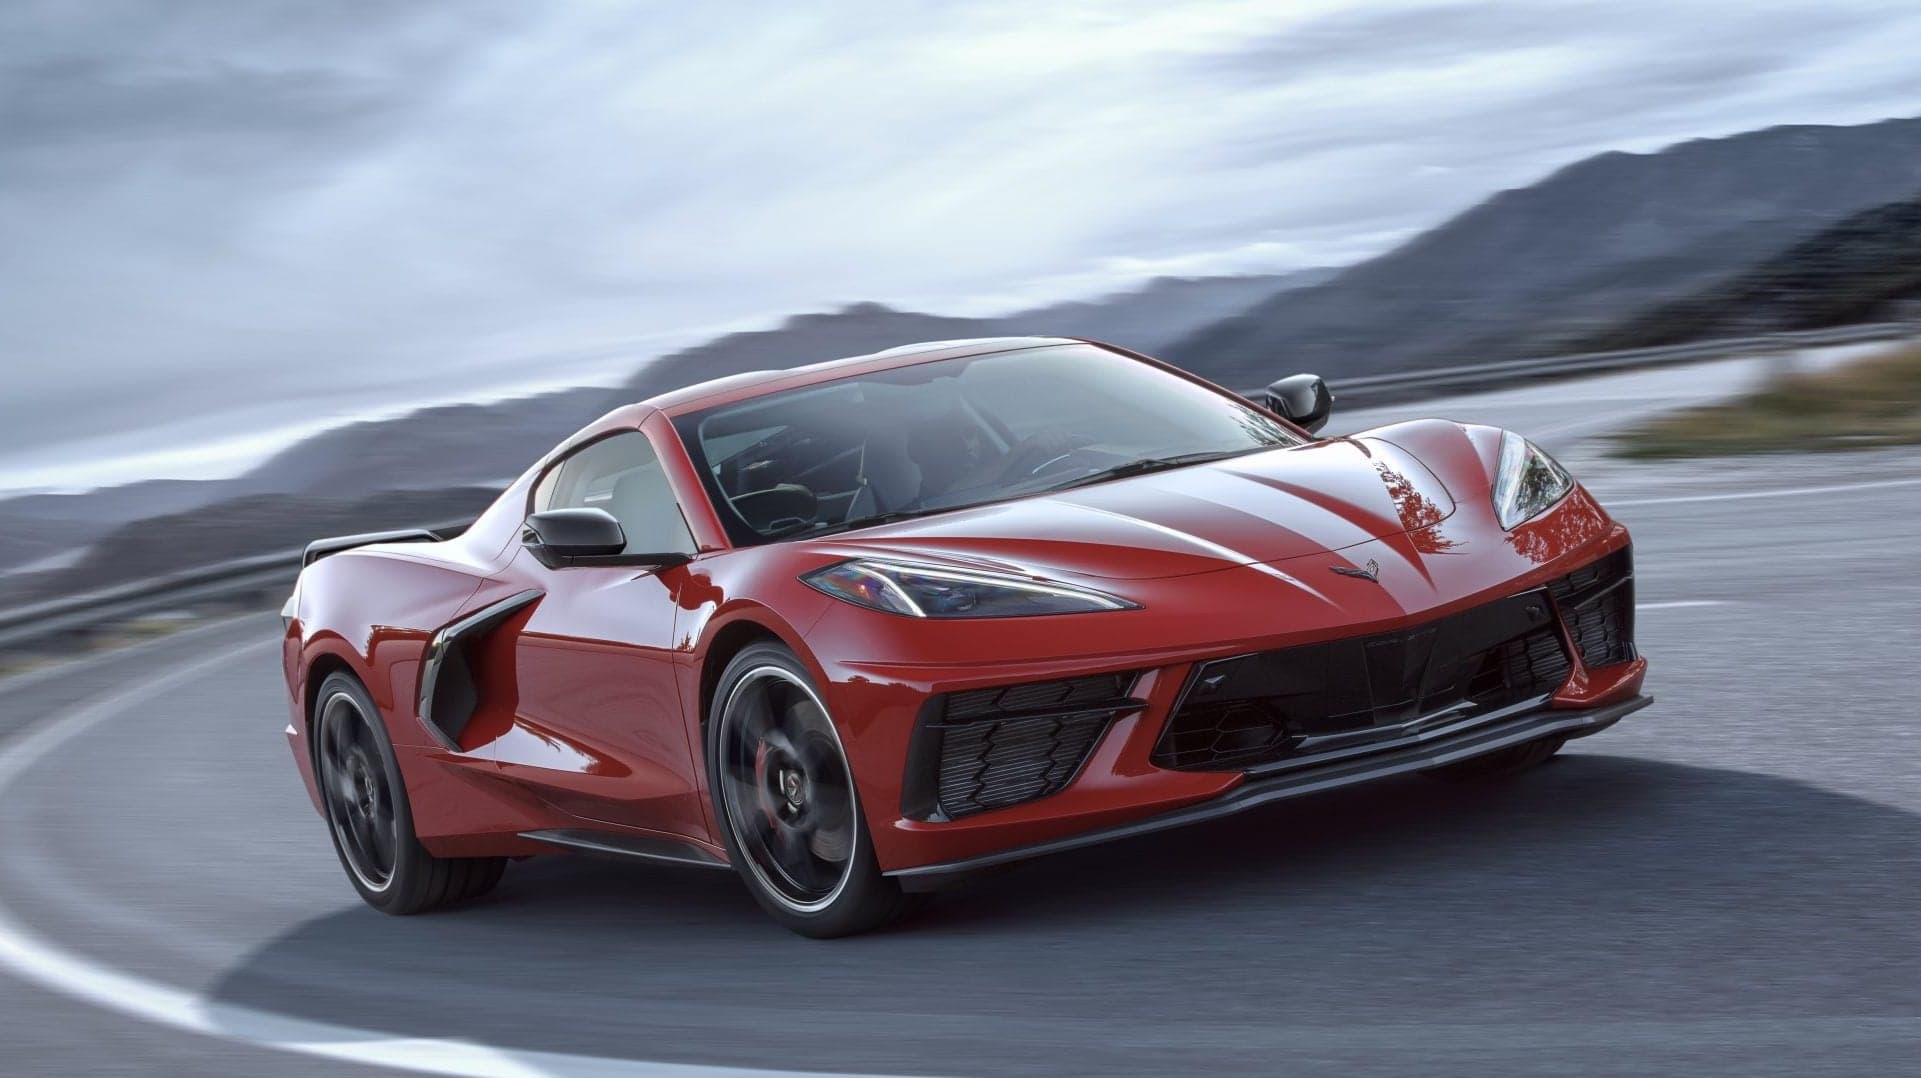 Mid-Engined 2020 Chevrolet Corvette C8’s Top Speed Hasn’t Been Tested Yet: Report